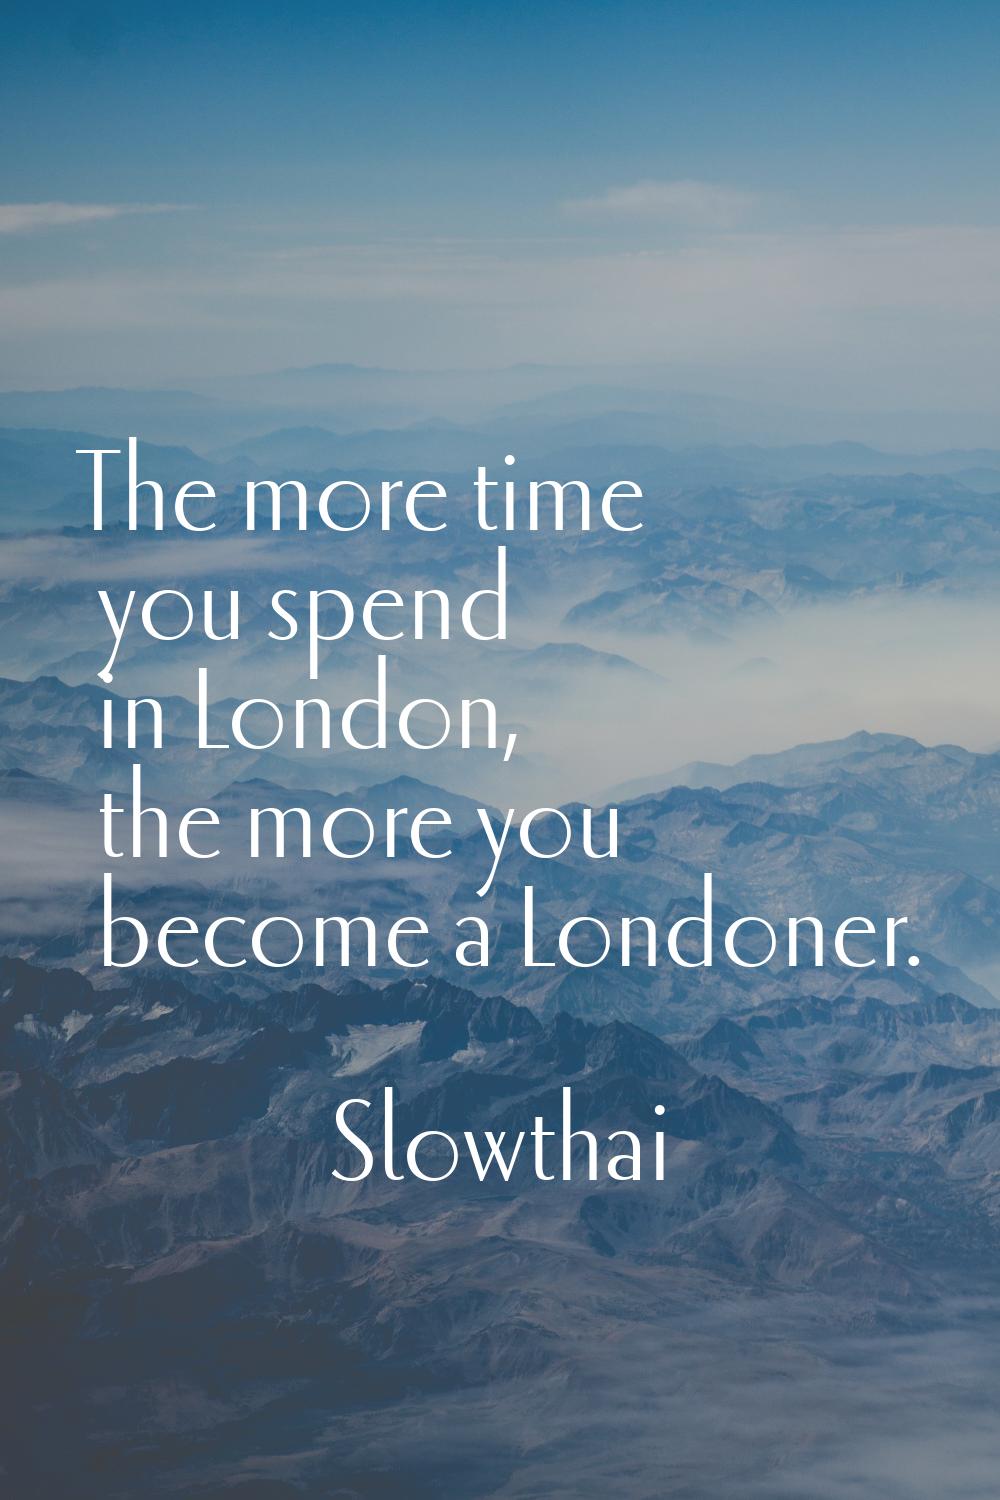 The more time you spend in London, the more you become a Londoner.